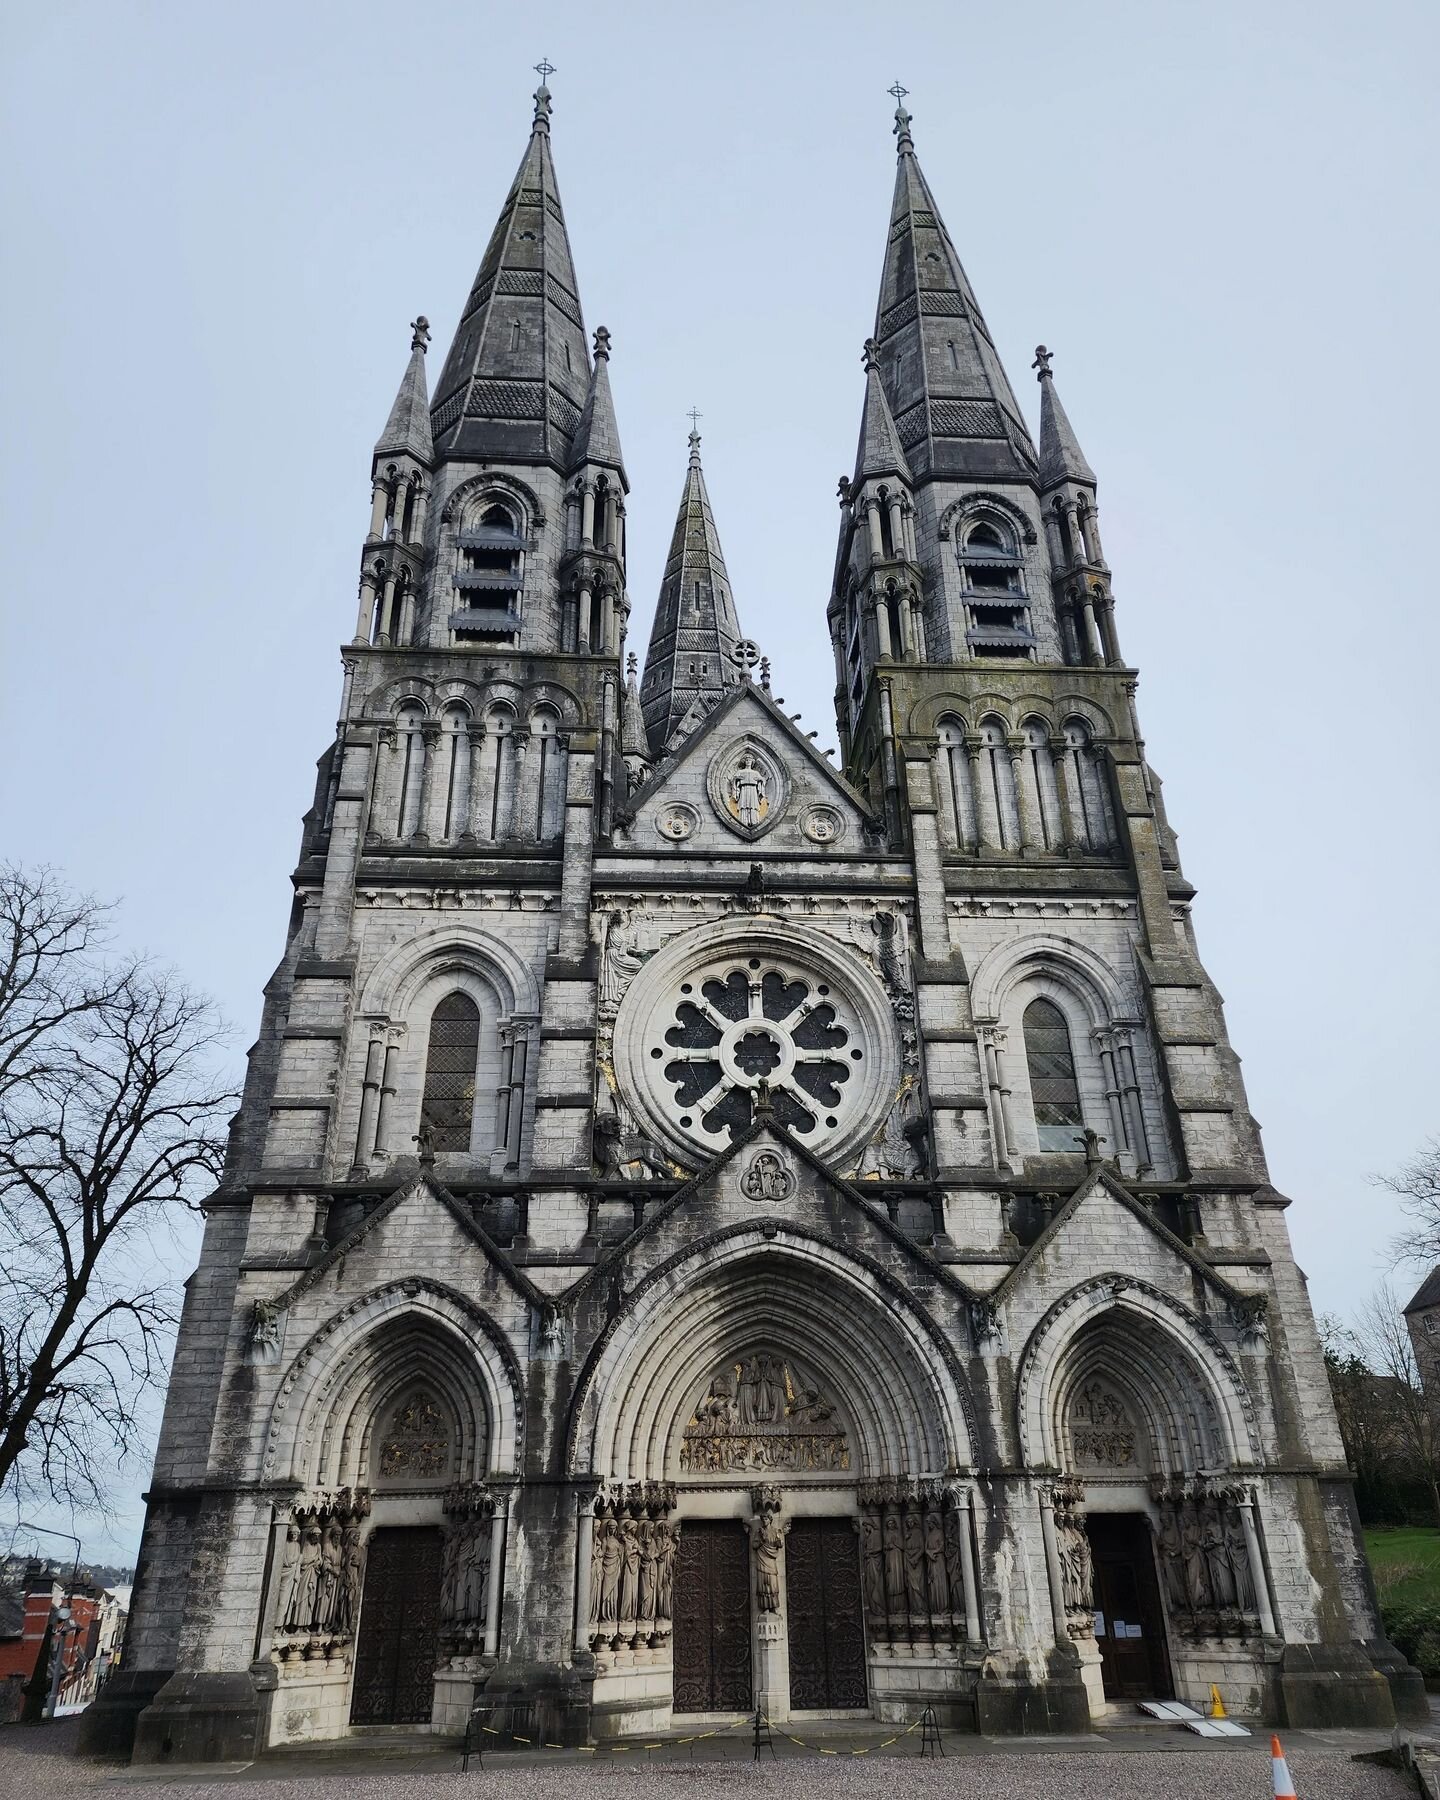 🍀 Delve into history and marvel at the beauty of St Fin Barre's Cathedral in the heart of Cork City, Ireland. This stunning landmark, steeped in culture, opens its doors every day from 9am to 5pm, ready to welcome curious visitors like you. There's 